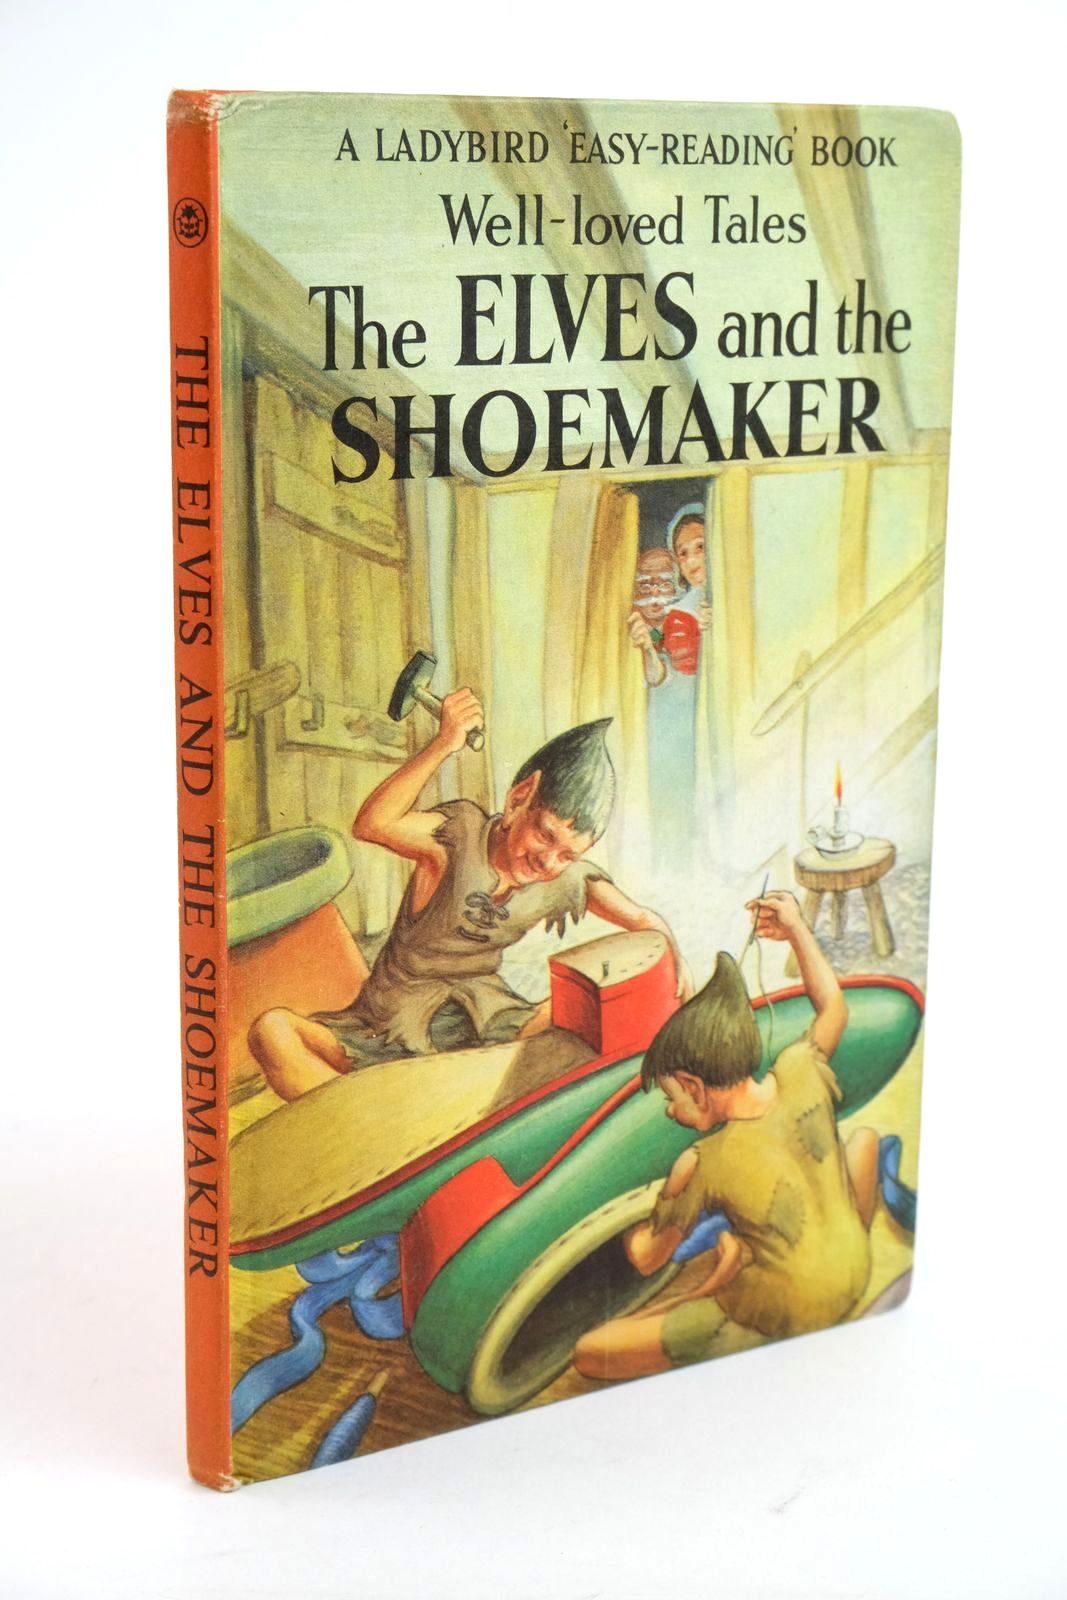 Photo of THE ELVES AND THE SHOEMAKER written by Southgate, Vera illustrated by Lumley, Robert published by Wills & Hepworth Ltd. (STOCK CODE: 1322099)  for sale by Stella & Rose's Books